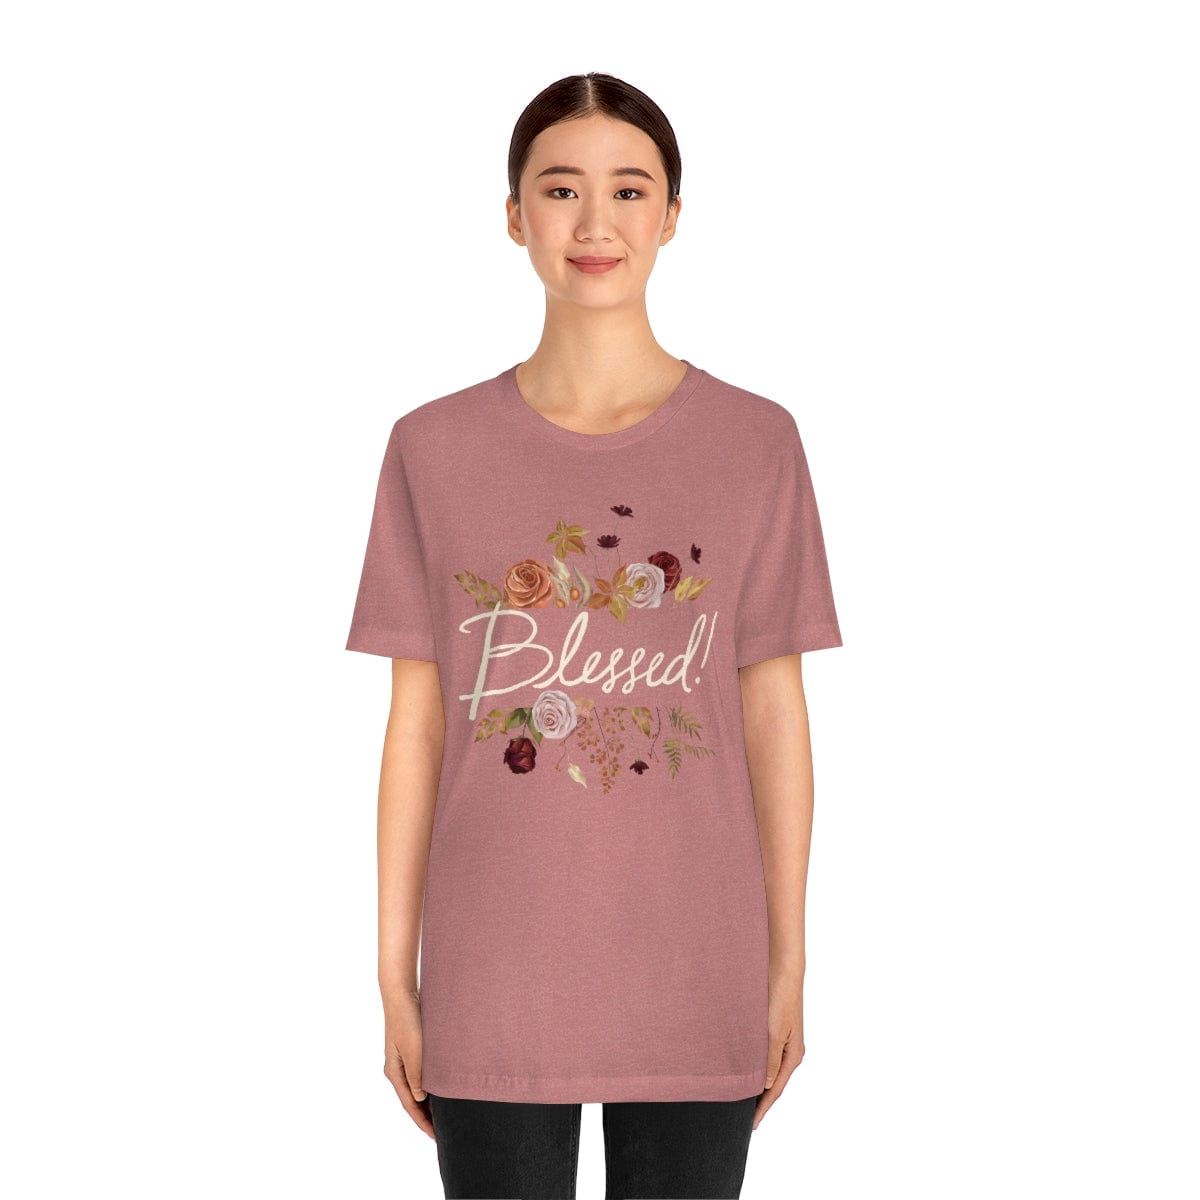 Printify Women's Clothing Blessed Autumn Fall Tshirt - 7 Colors- S-3XL